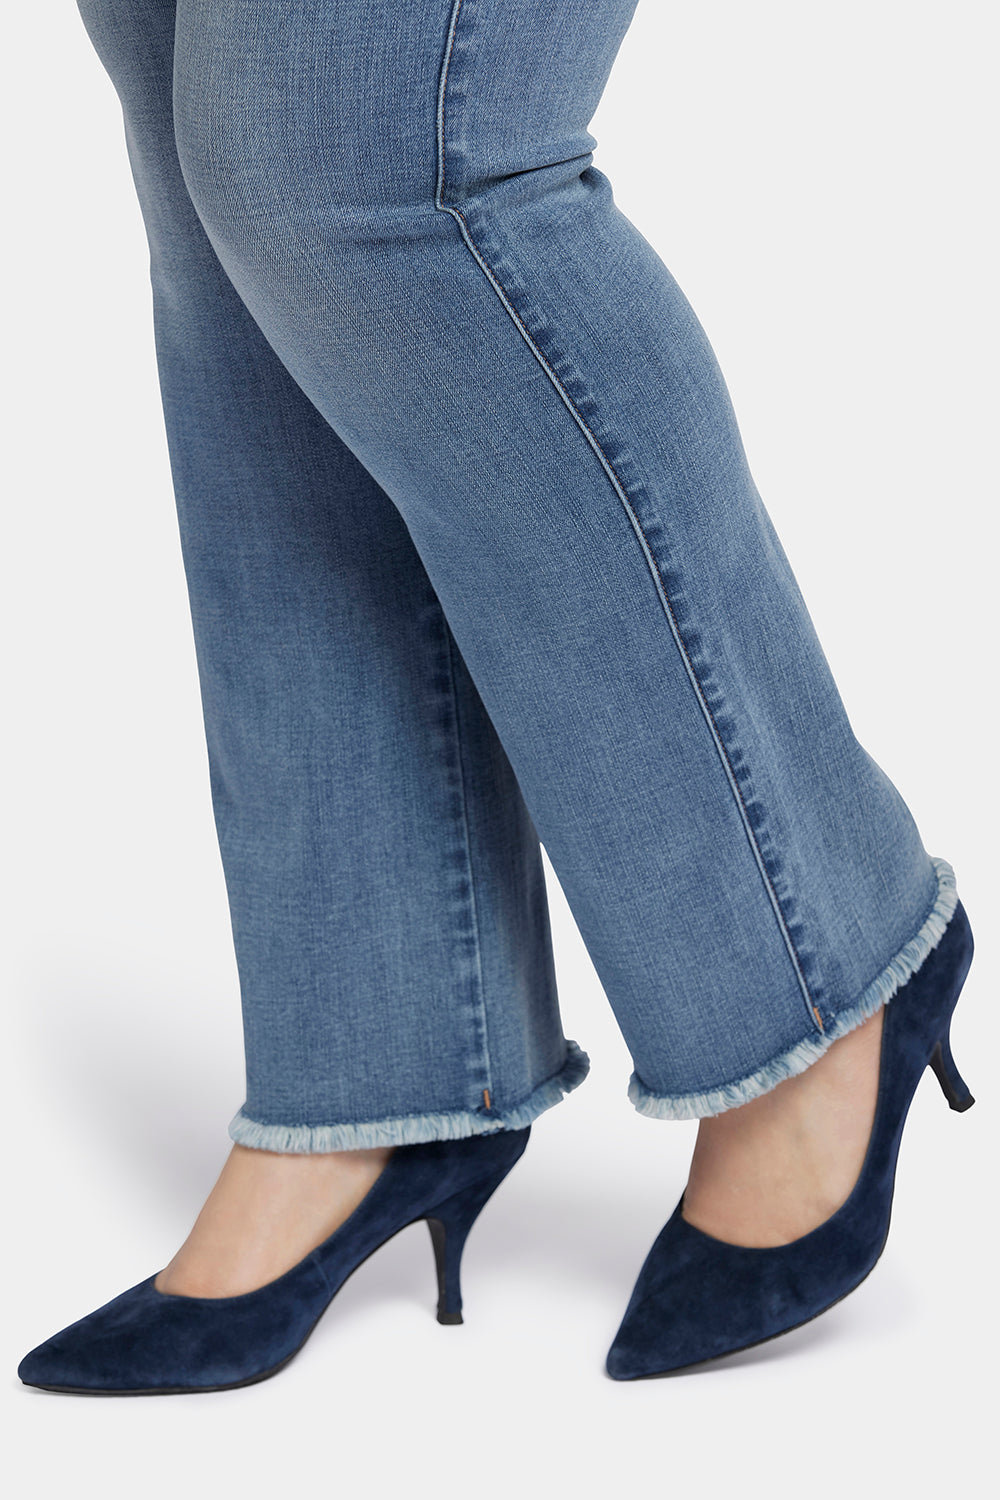 NYDJ Marilyn Straight Jeans In Plus Size With High Rise And Frayed Hems - Paddington